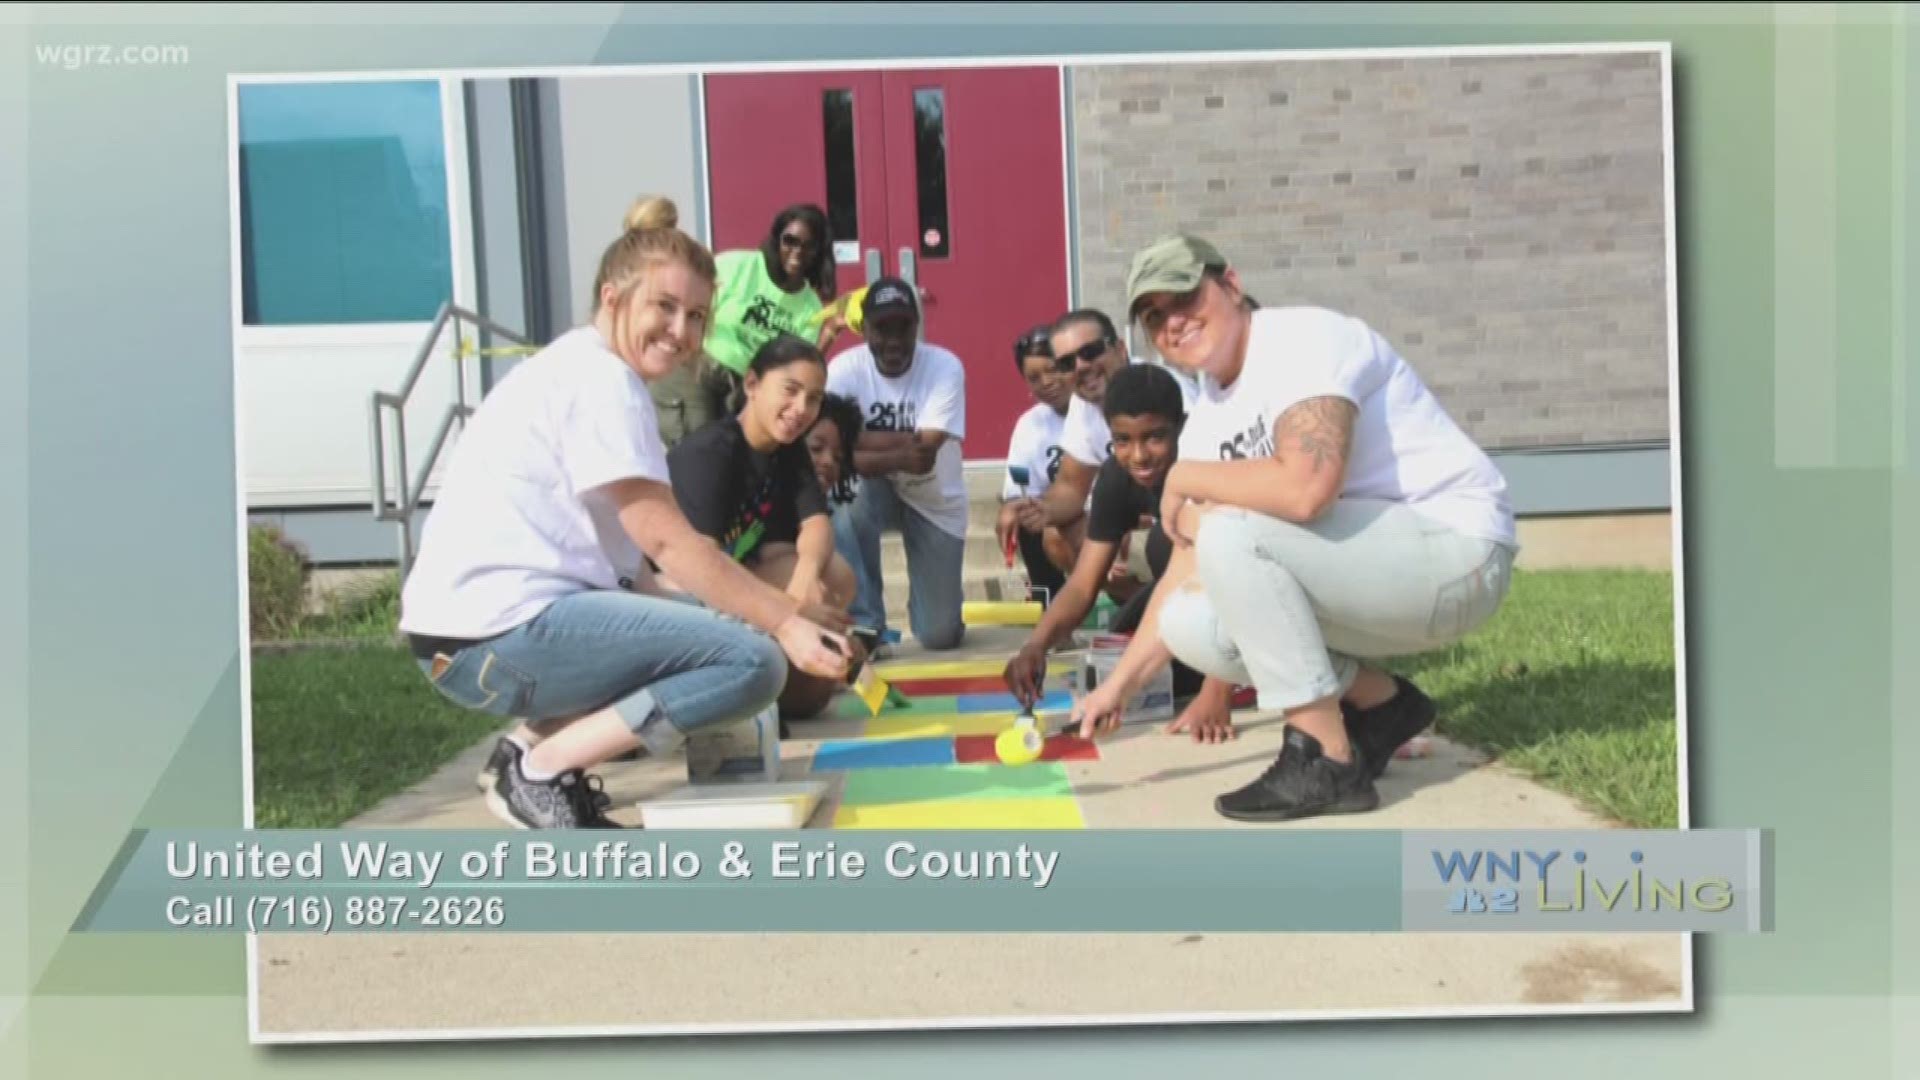 WNY Living - August 13 - United Way of Buffalo & Erie County